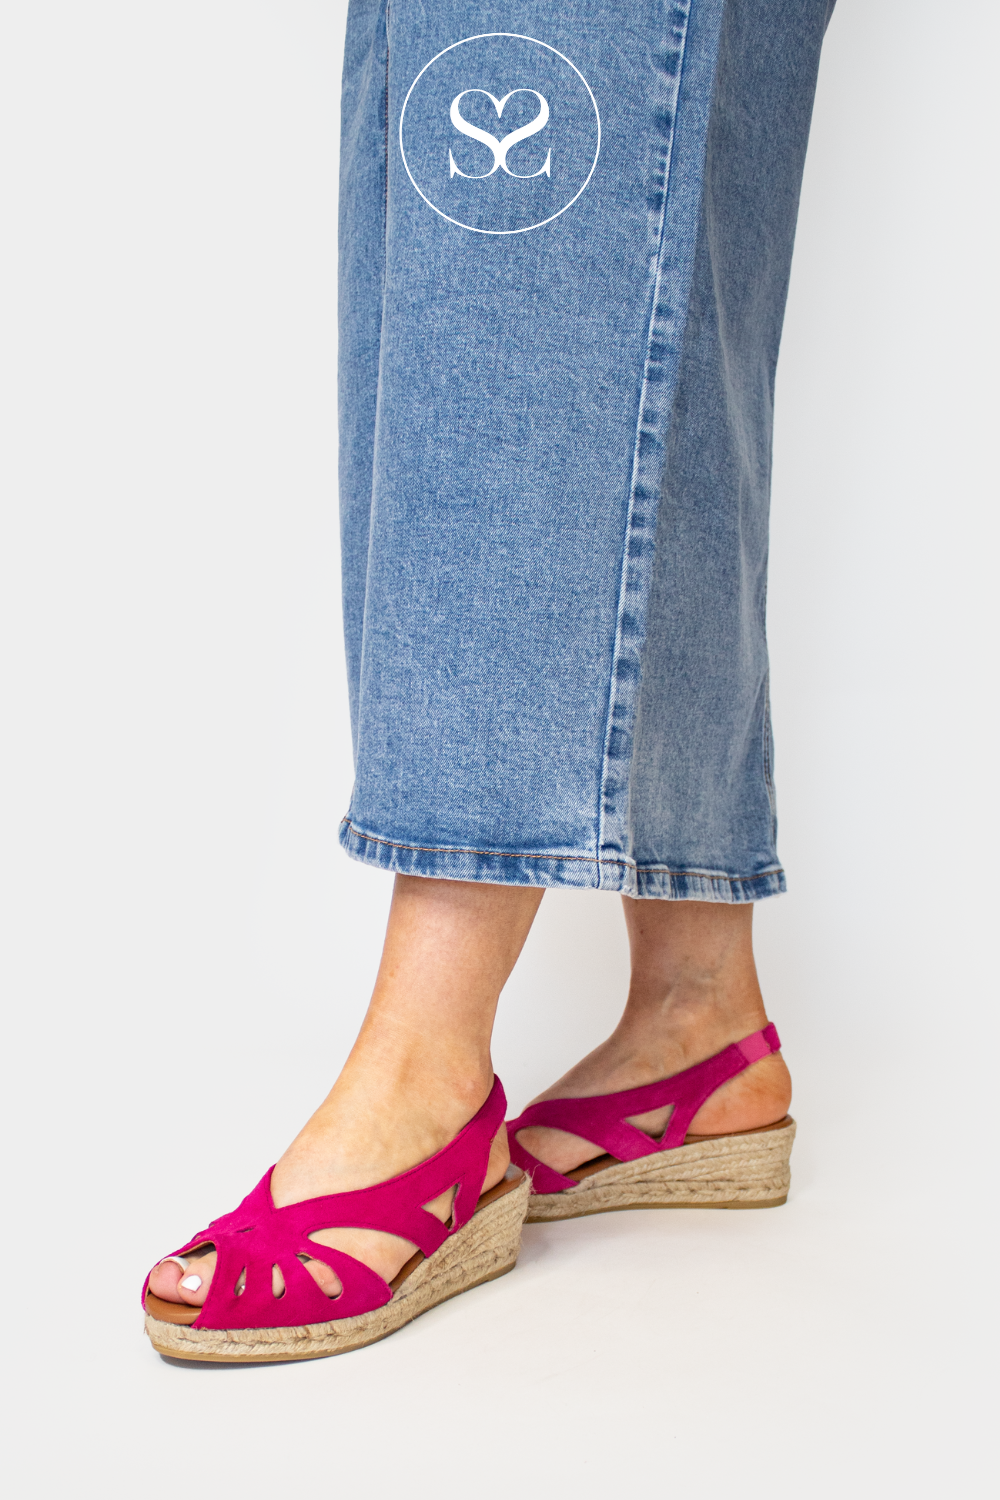 VIGUERA 2123 PINK SUEDE LOW HEEL WEDGE SANDALS WITH ELASTICATED SLINGBACK STRAP AND CUT OUT DETAILING AND A PEEPTOE